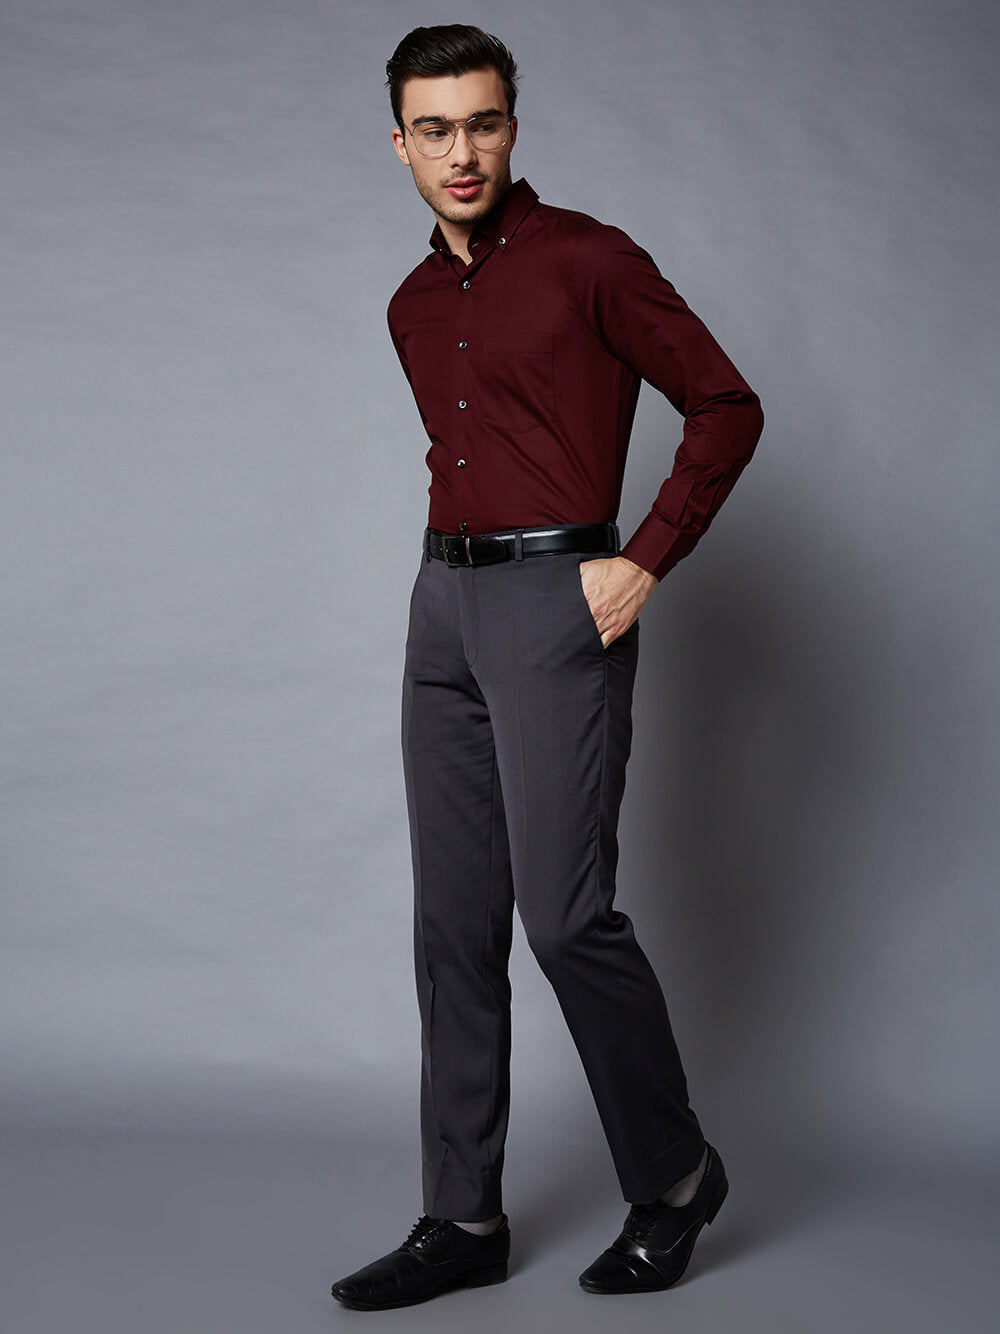 Roadster Men Checkered Casual Maroon, Black Shirt - Buy Roadster Men  Checkered Casual Maroon, Black Shirt Online at Best Prices in India |  Flipkart.com